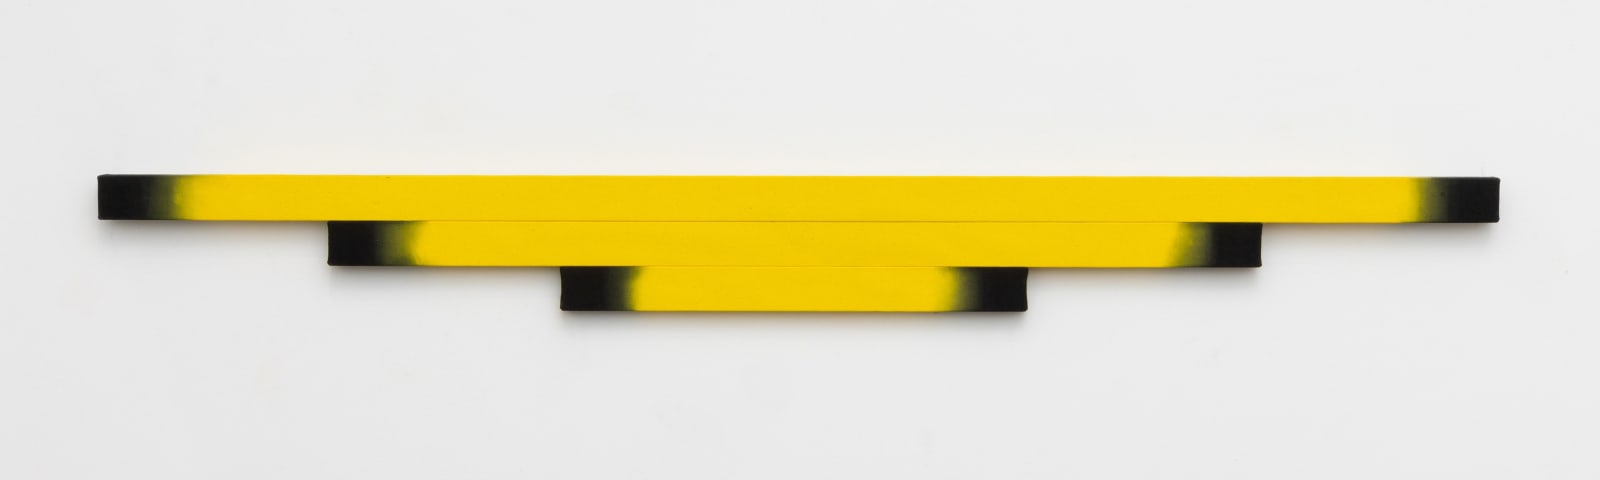 Horizontal shaped canvas painting stretched on three wooden bars varying in length and colors of yellow bleeding into black toward the edges.